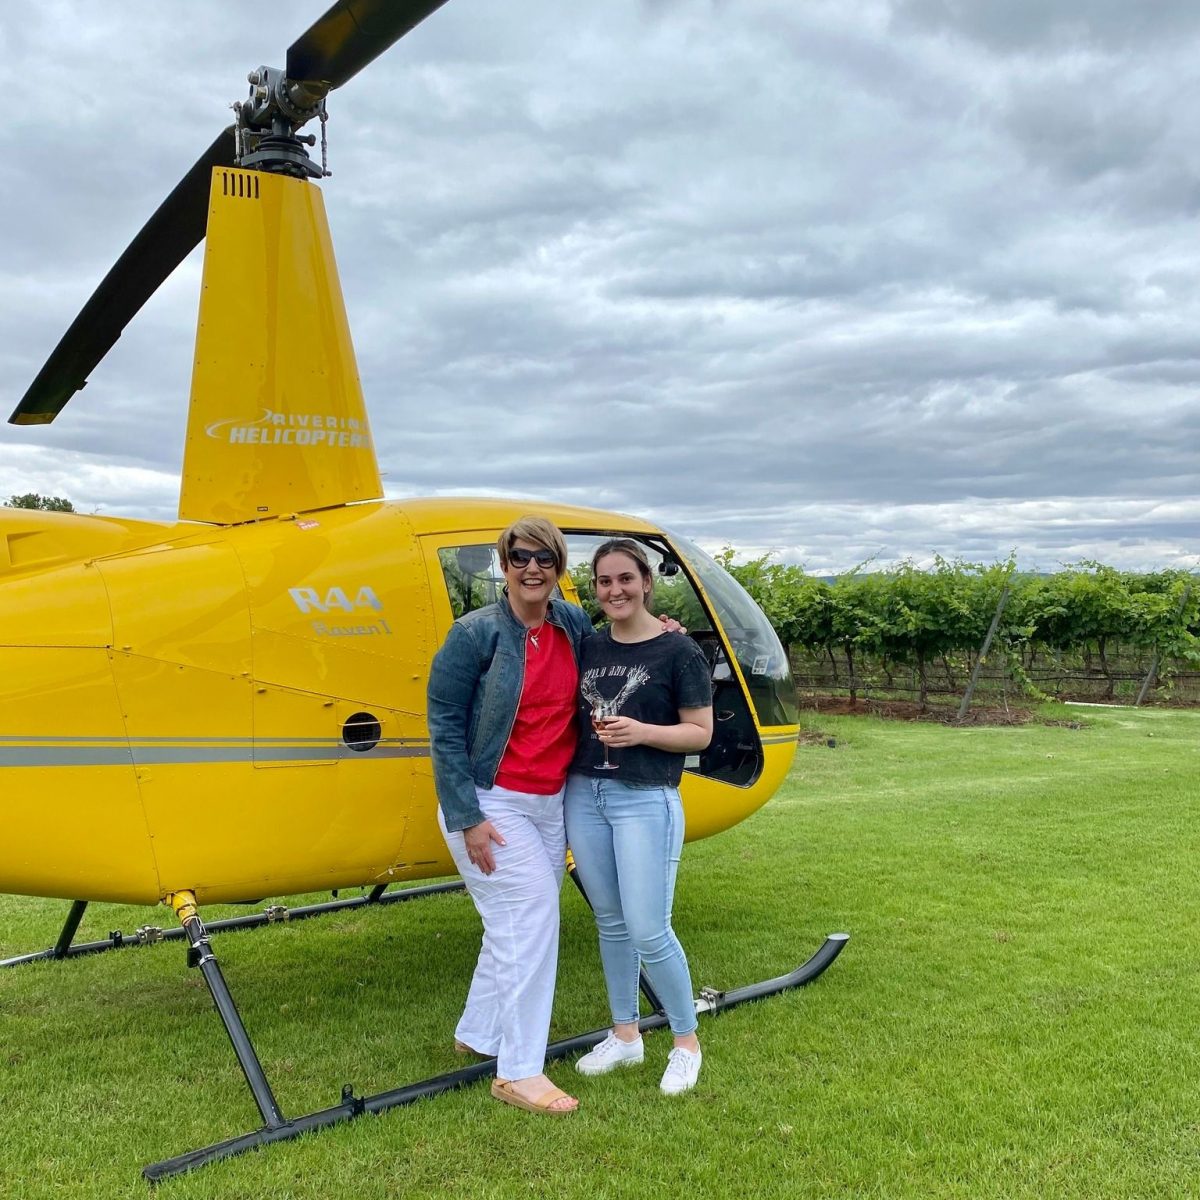 Two women drinking wine in front of helicopter